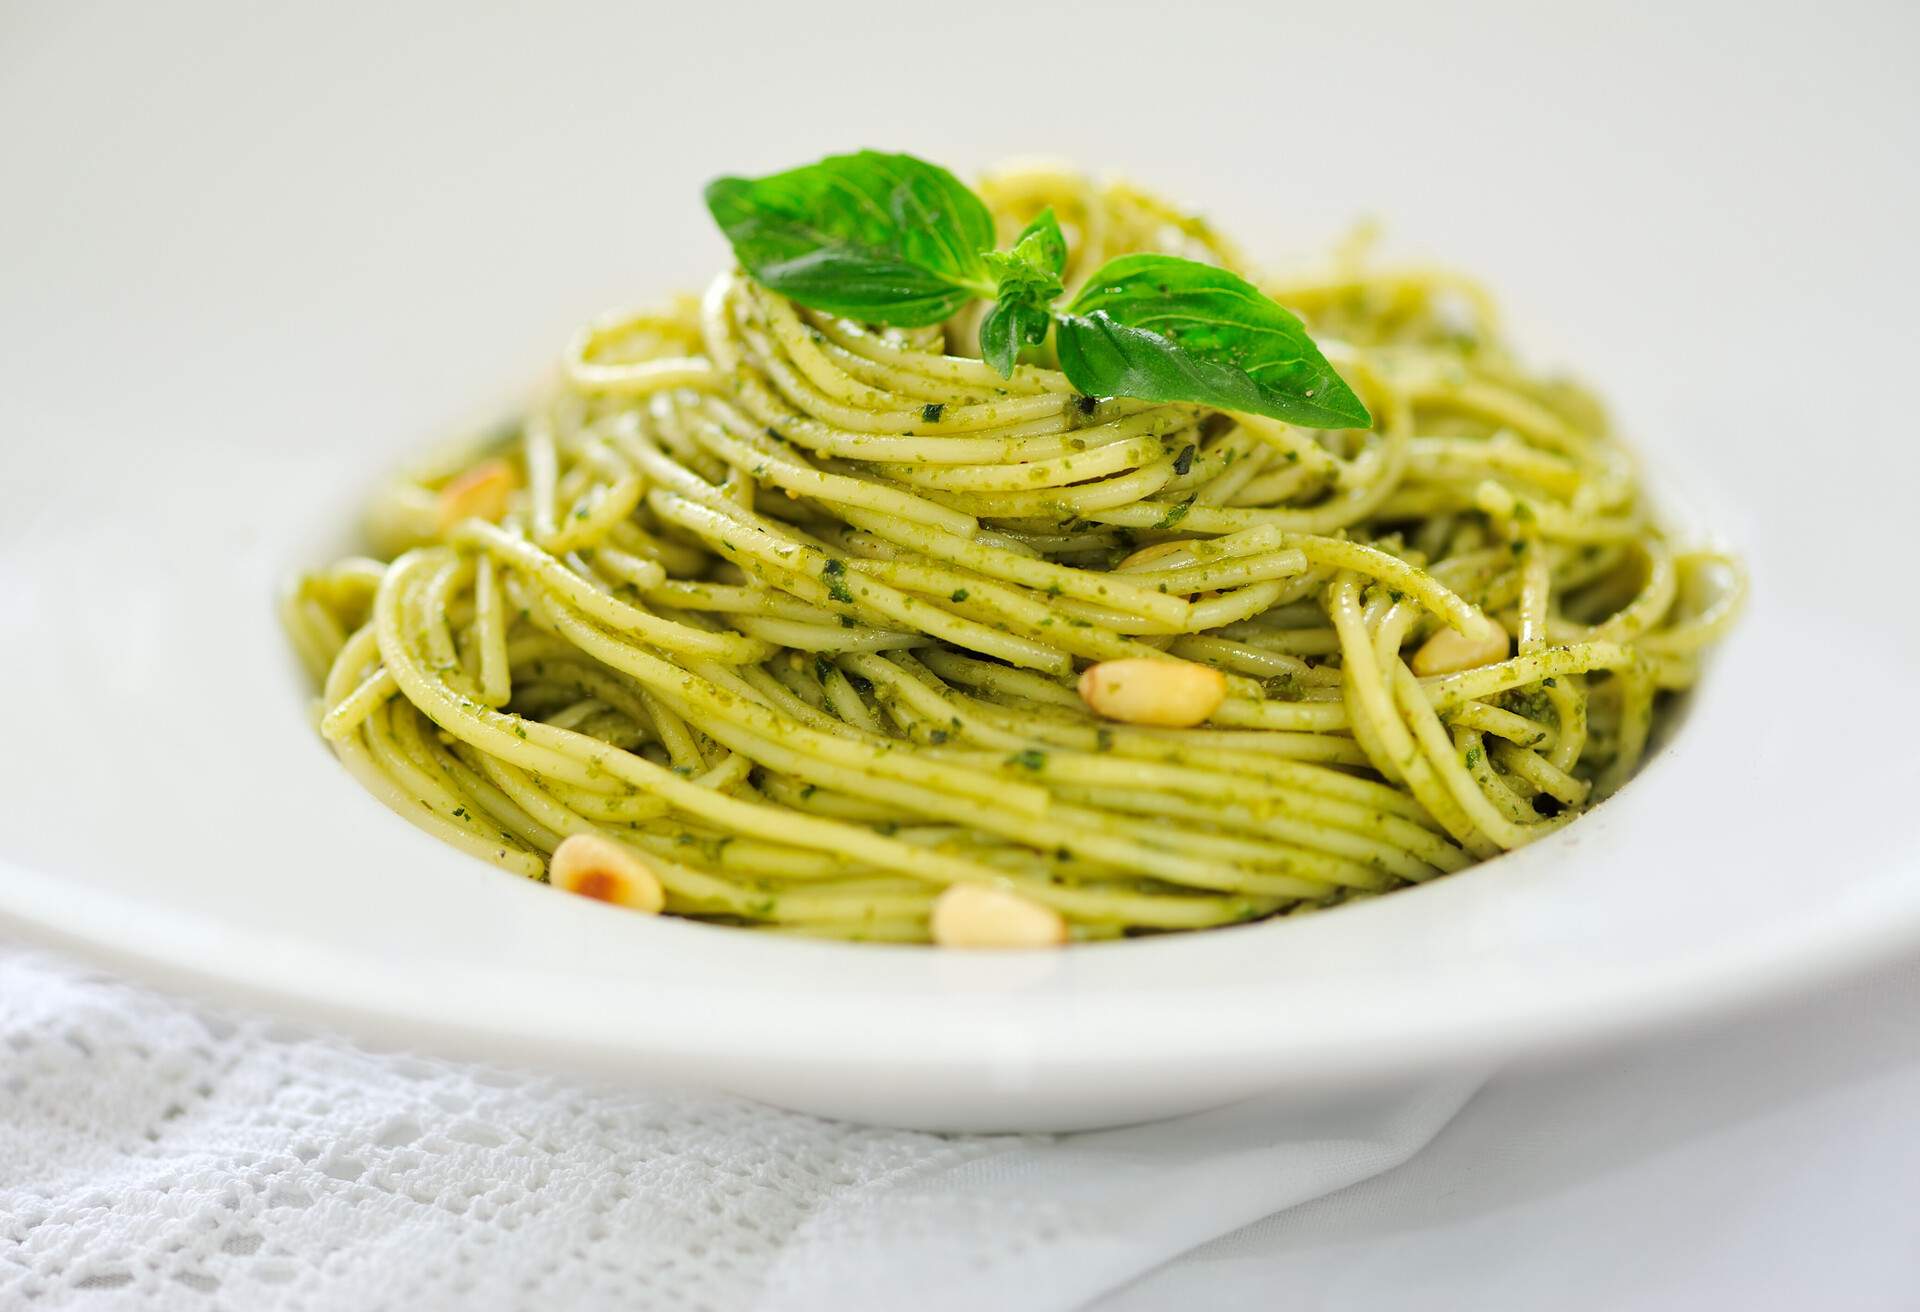 Pasta with Basil Pesto on Plate, Garnished with Basil Leaves